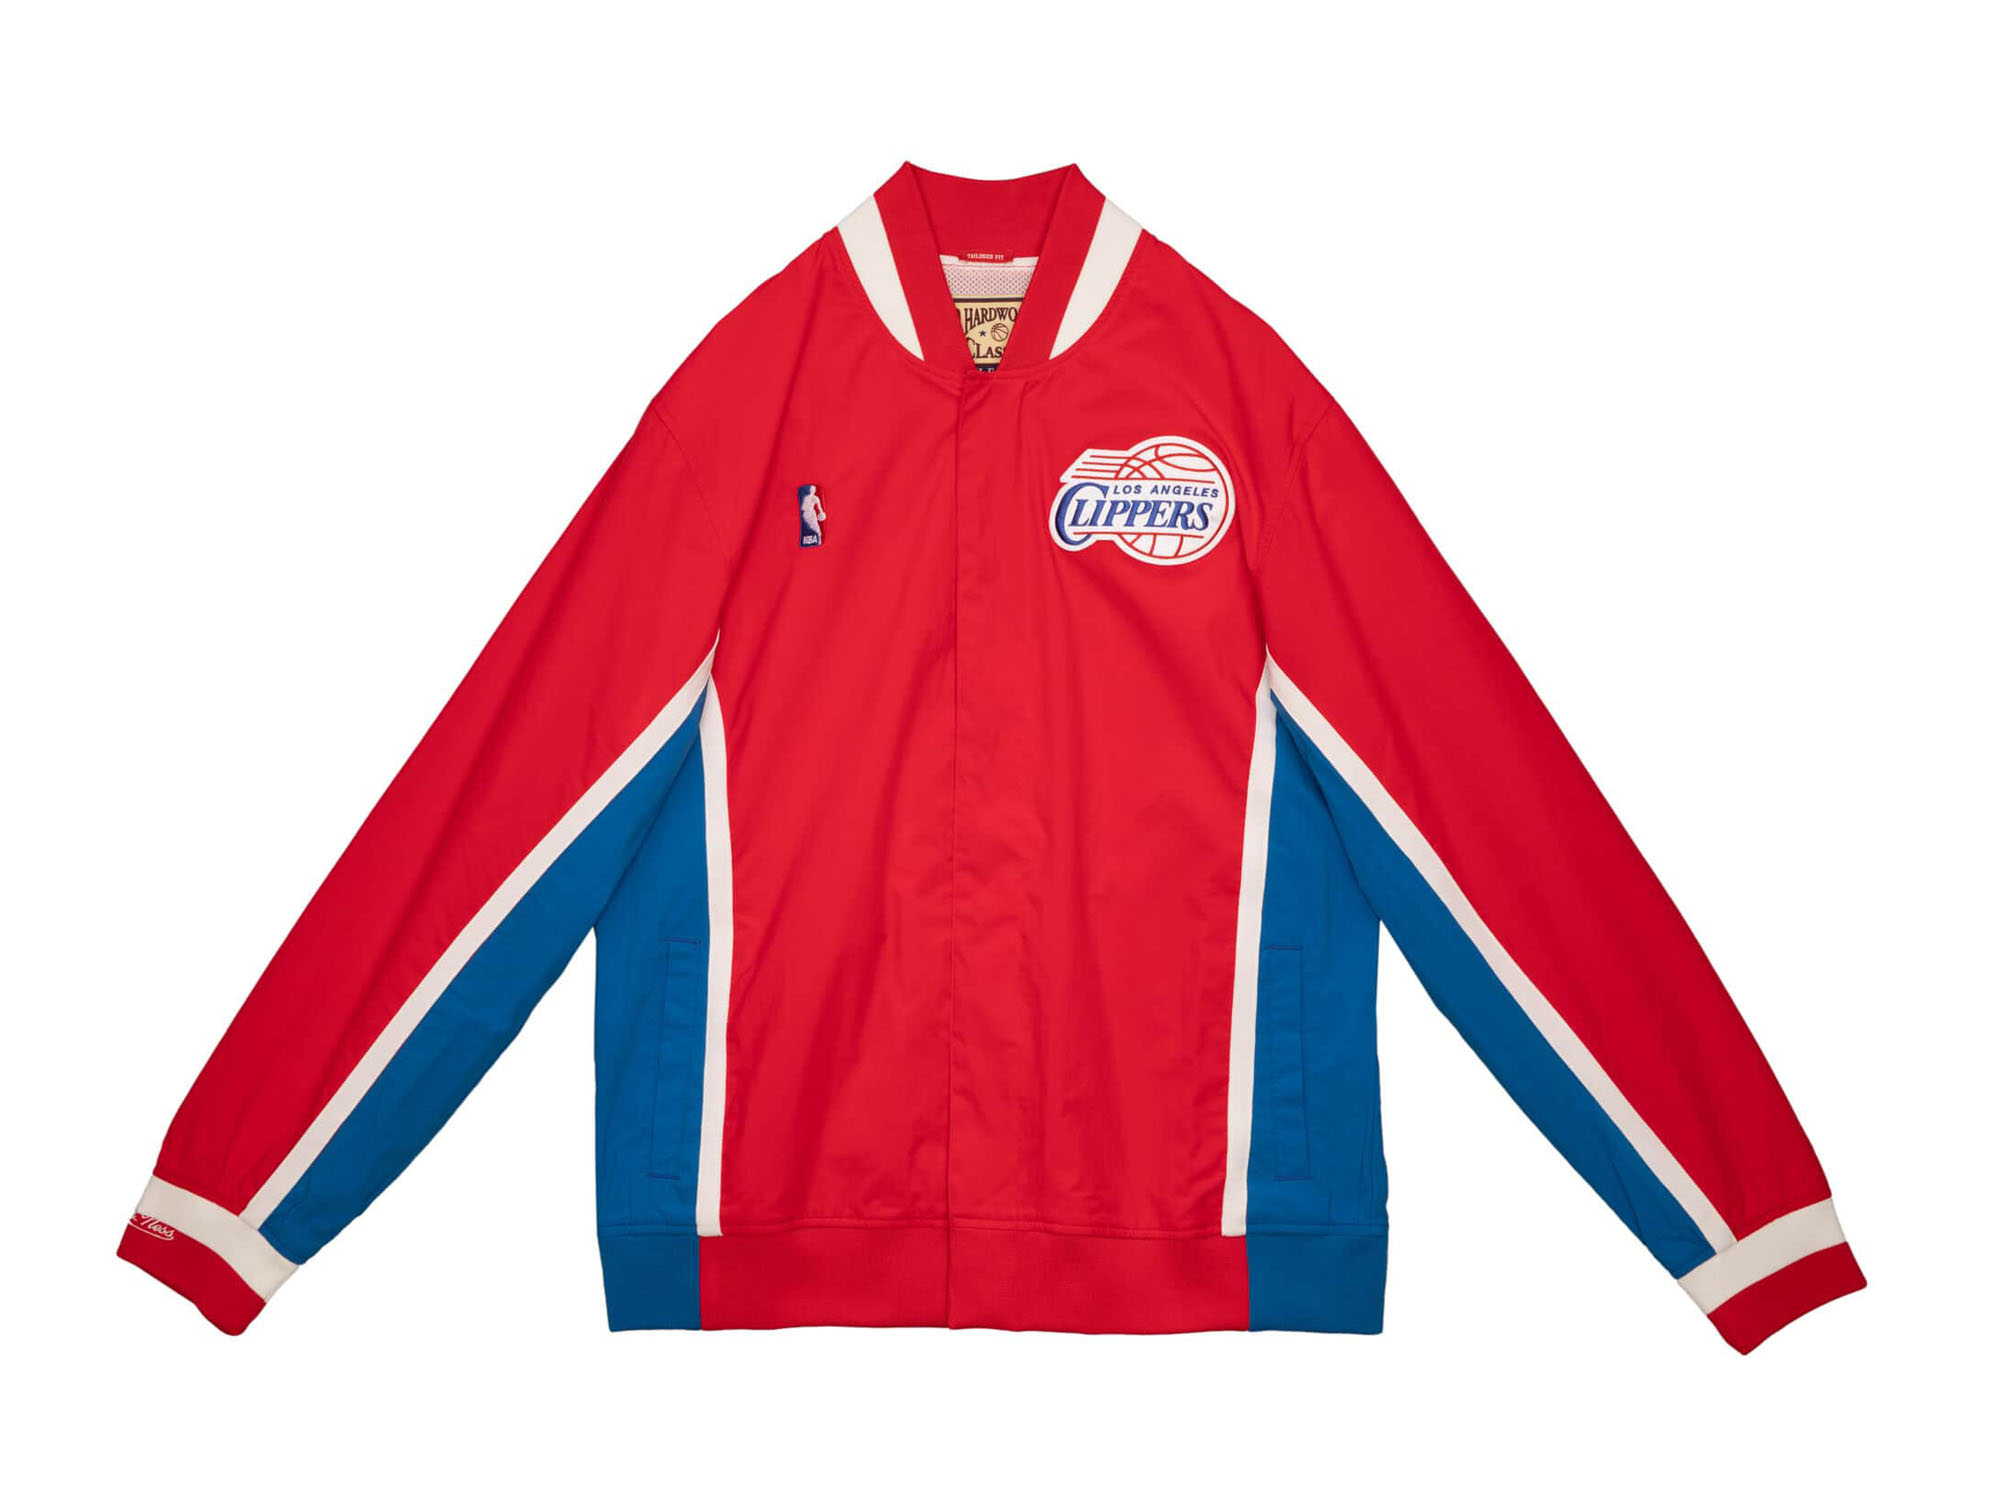 M&N NBA Los Angeles Clippers Authentic Warm Up Jacket